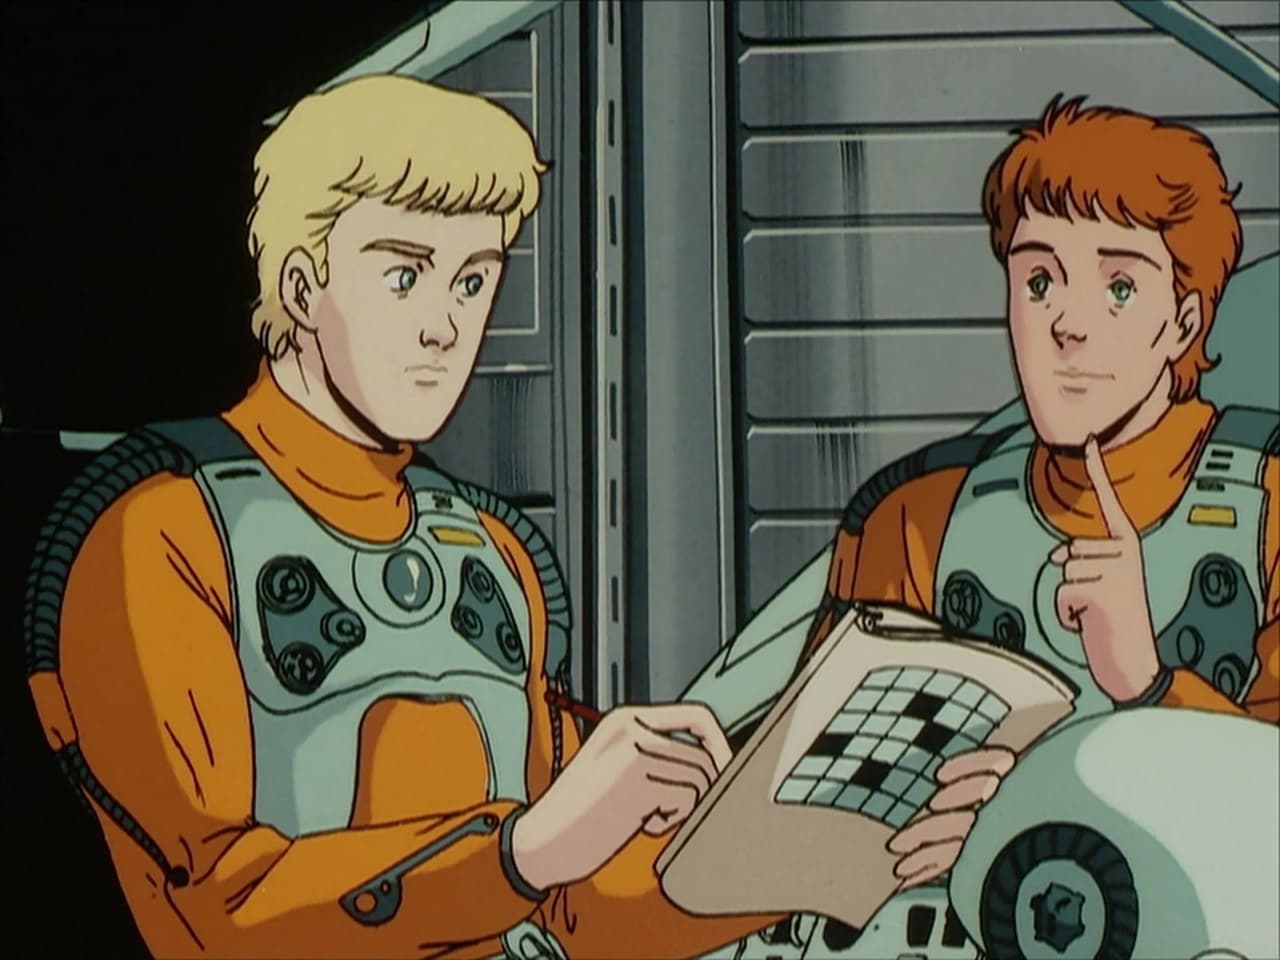 Legend of the Galactic Heroes - Season 2 Episode 26 : Death Match at Vermillion (Part 2)